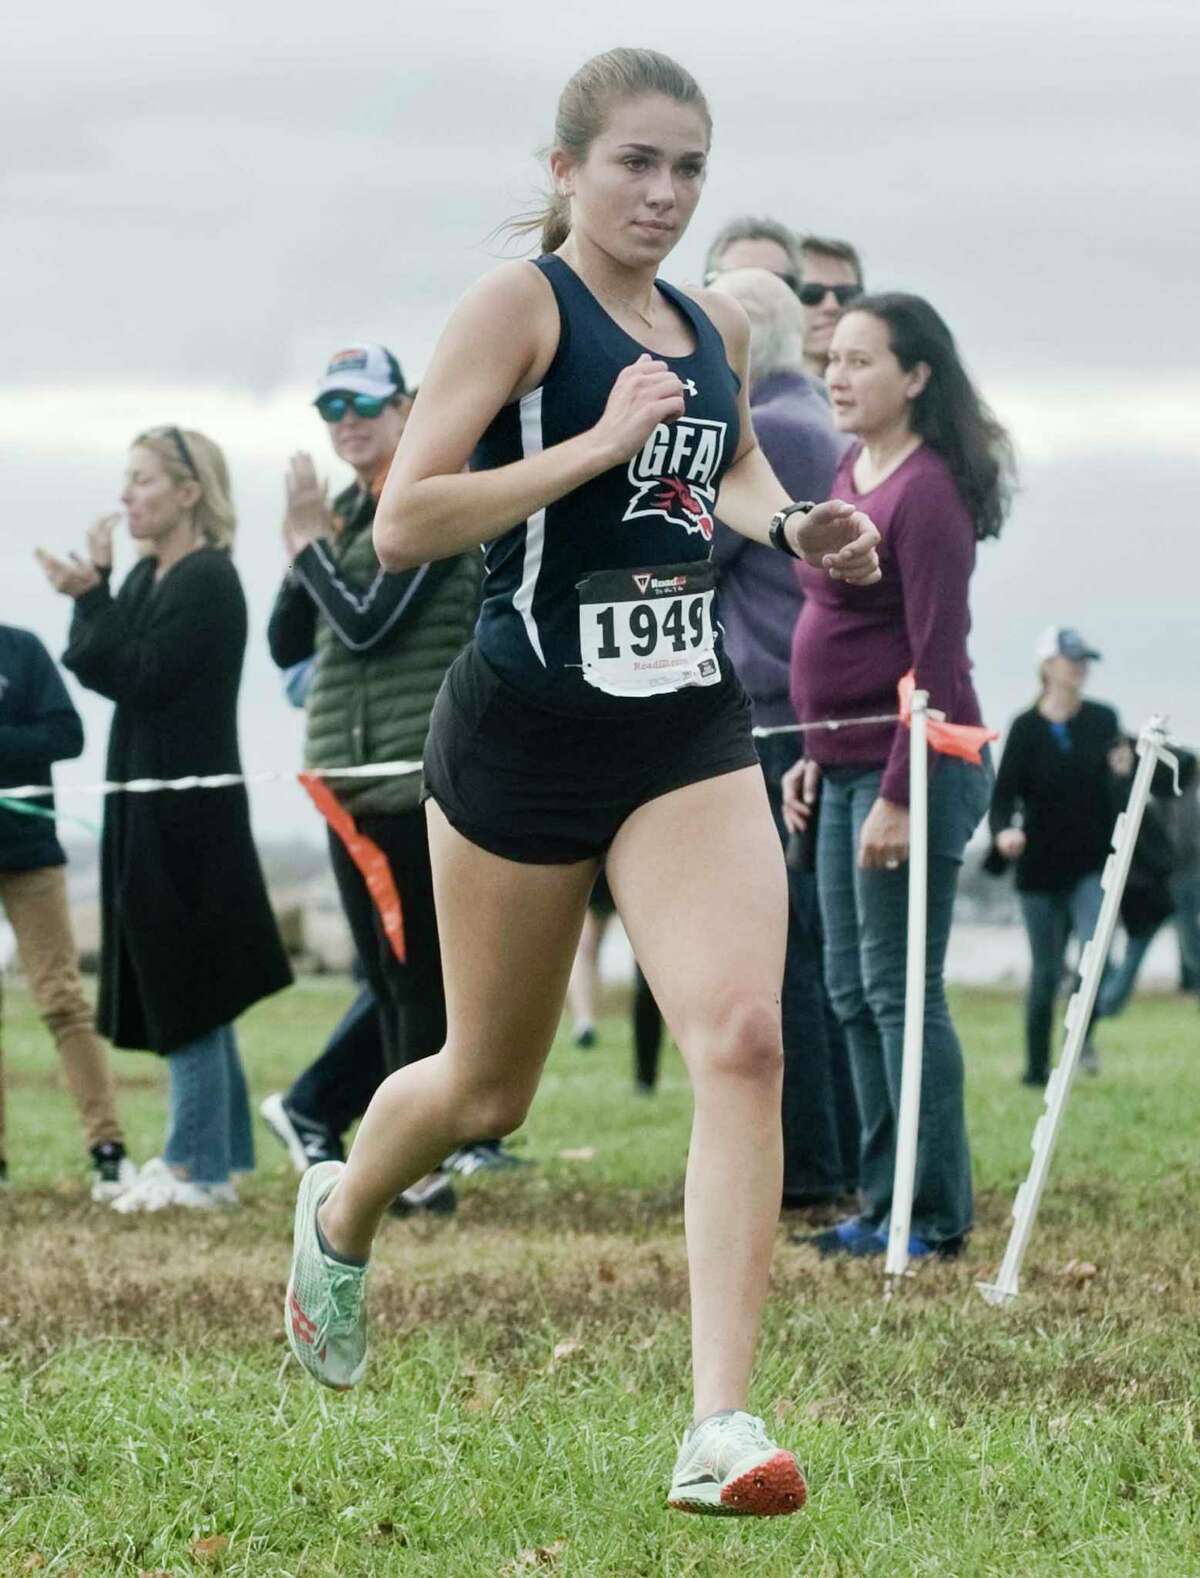 Caroline McCall, of Greens Farms Academy, finishing third in the FAA Girls Cross Country Championships at Sherwood Island in Westport. Monday, Oct. 28, 2019